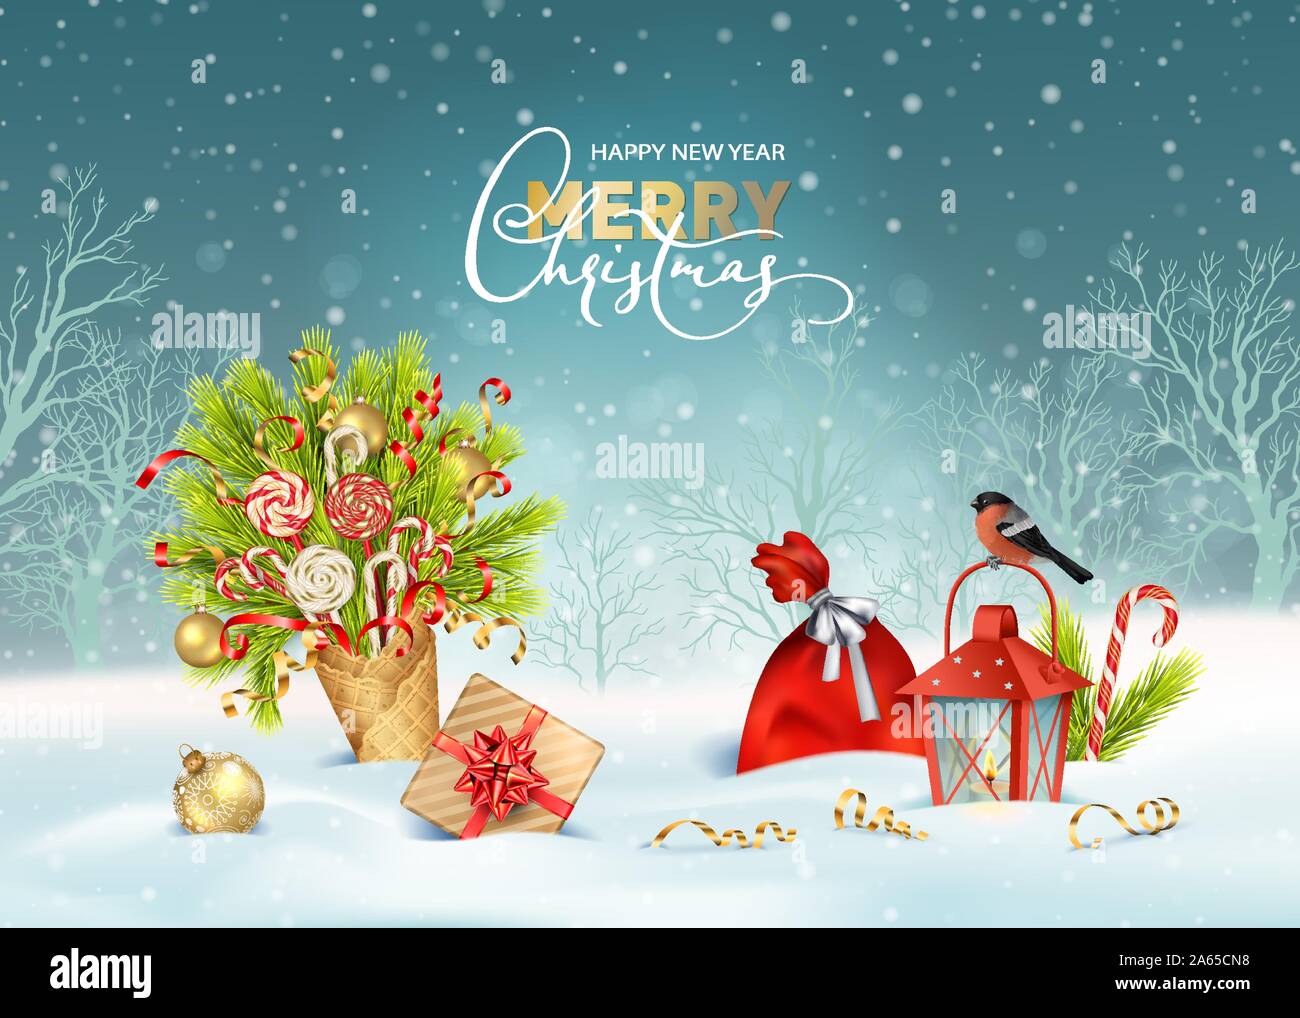 Christmas Holiday Background Stock Vector